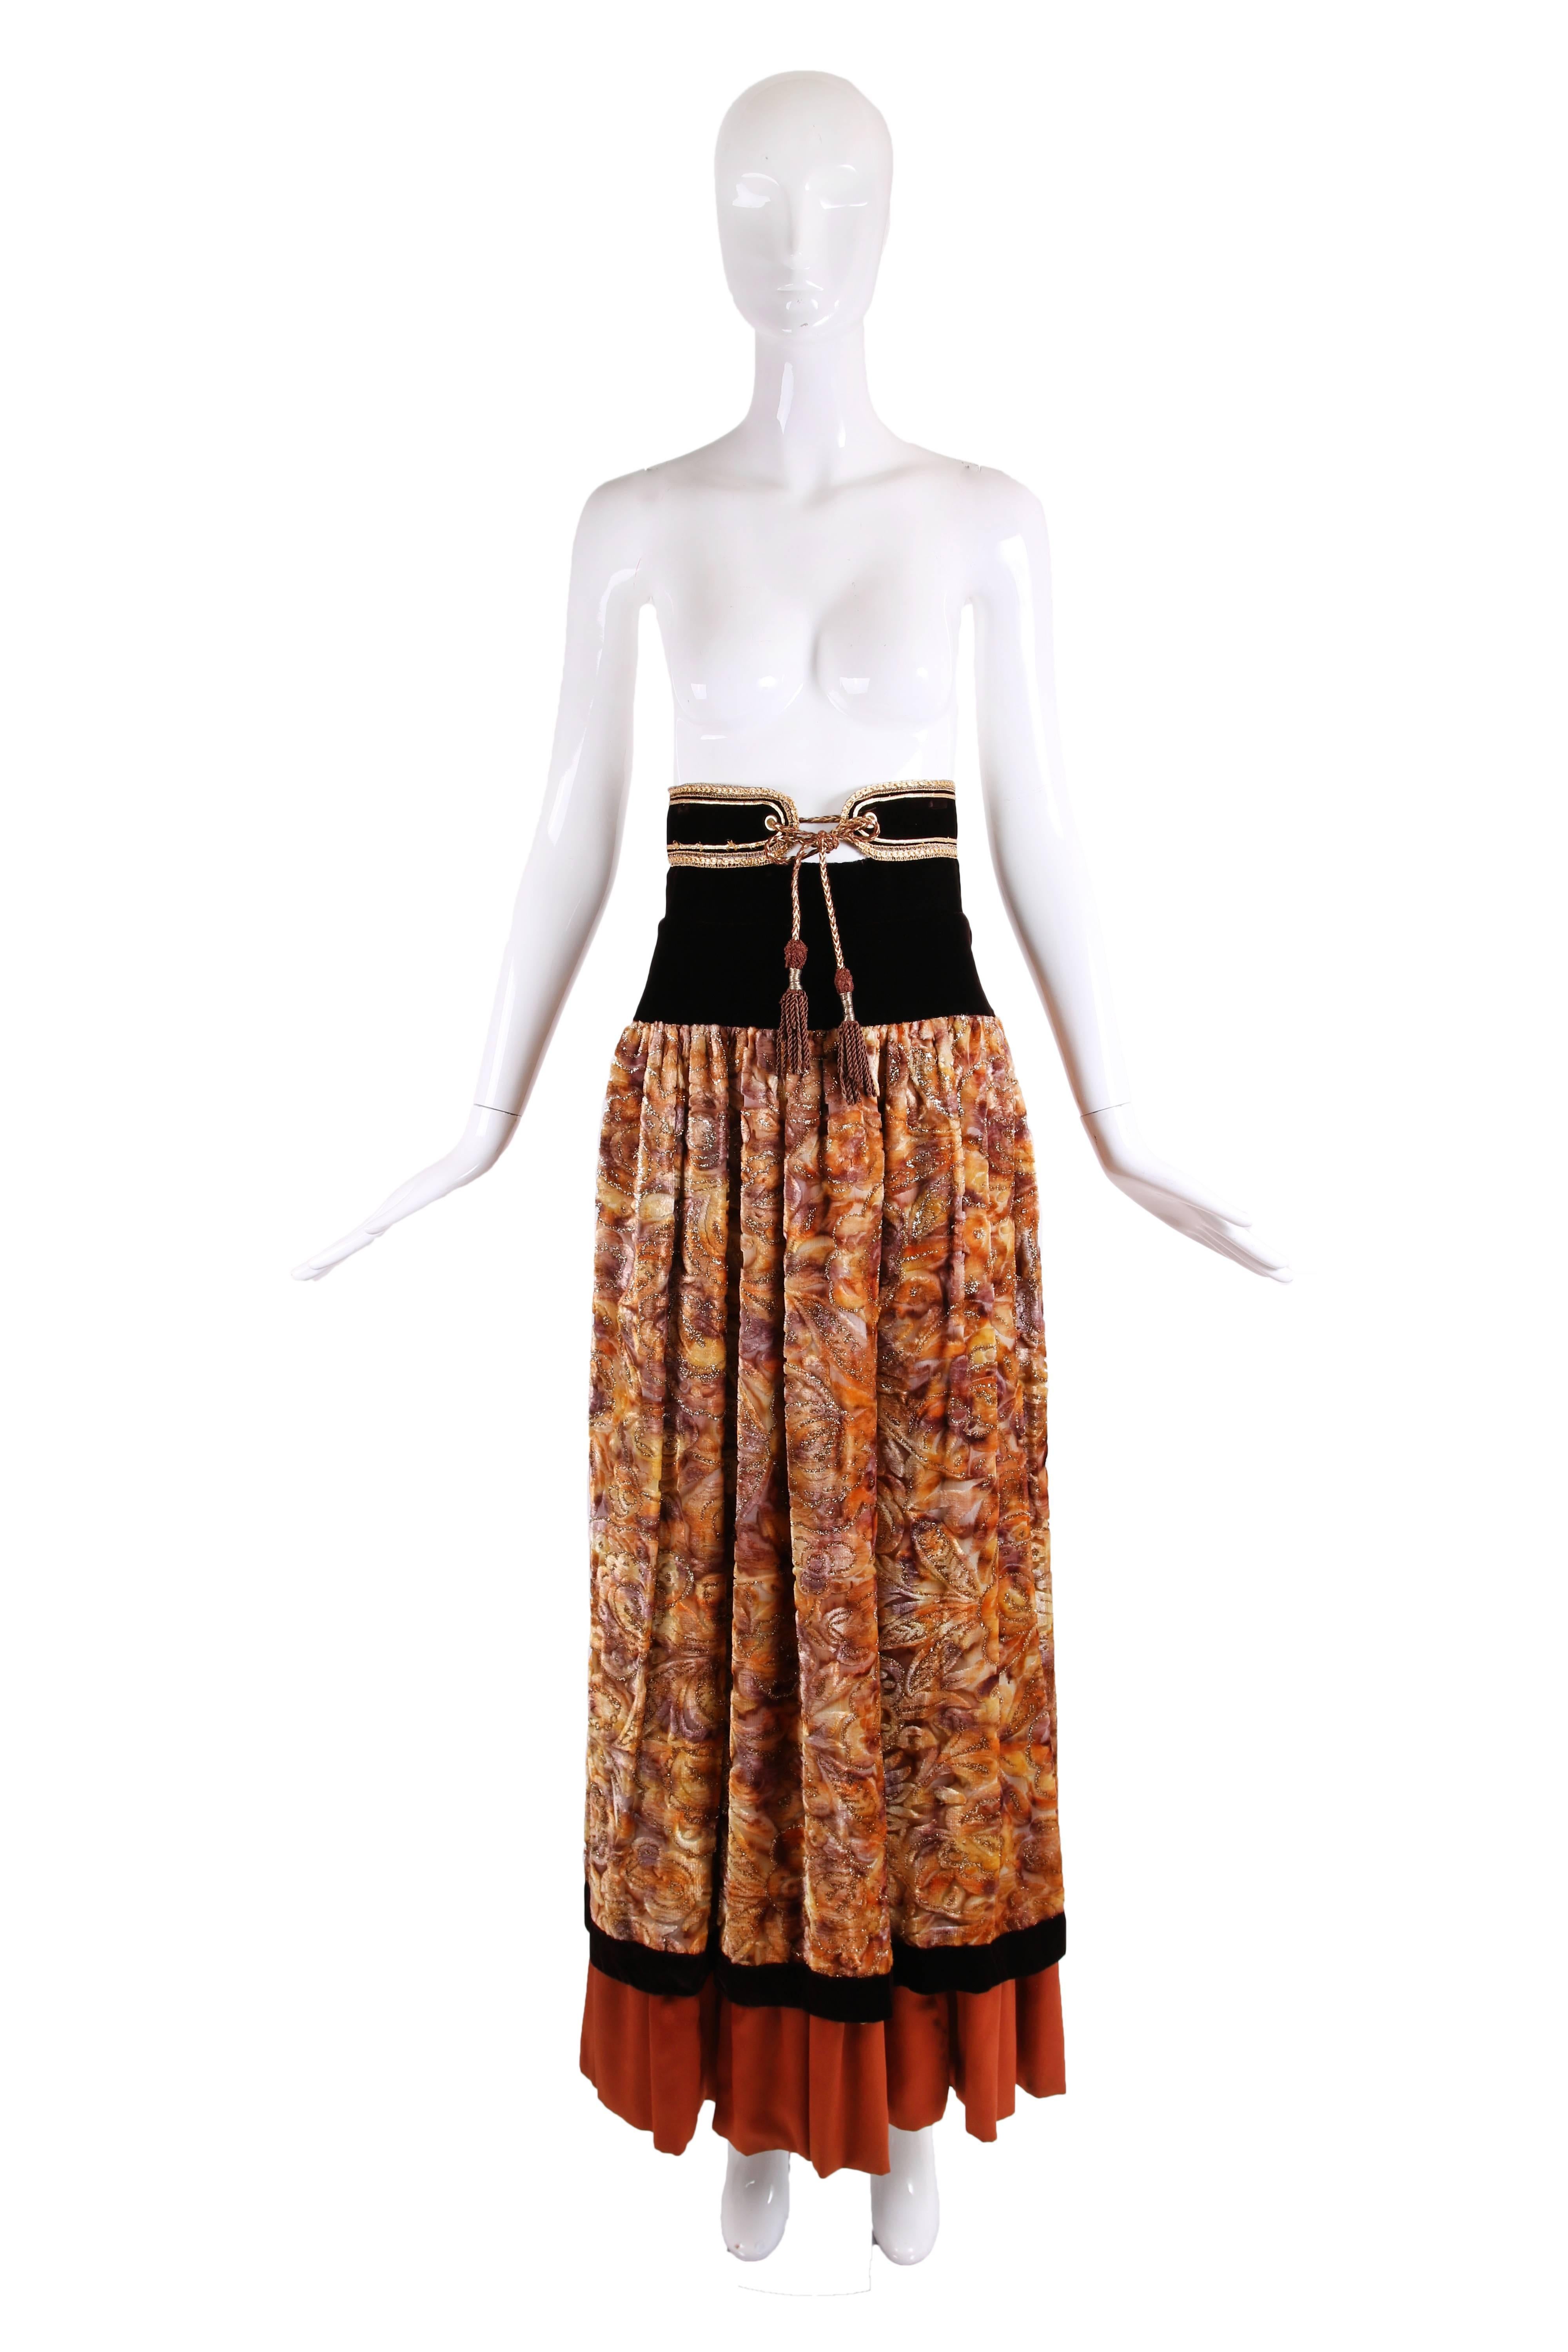 Inspired by Yves Saint Laurent (unlabeled) velvet burnout maxi skirt with a velvet waist band, gold metallic cord trim & waist ties and an interior layer of burnt orange fabric (feels like a silk blend) that pokes out at the hem. In good condition -